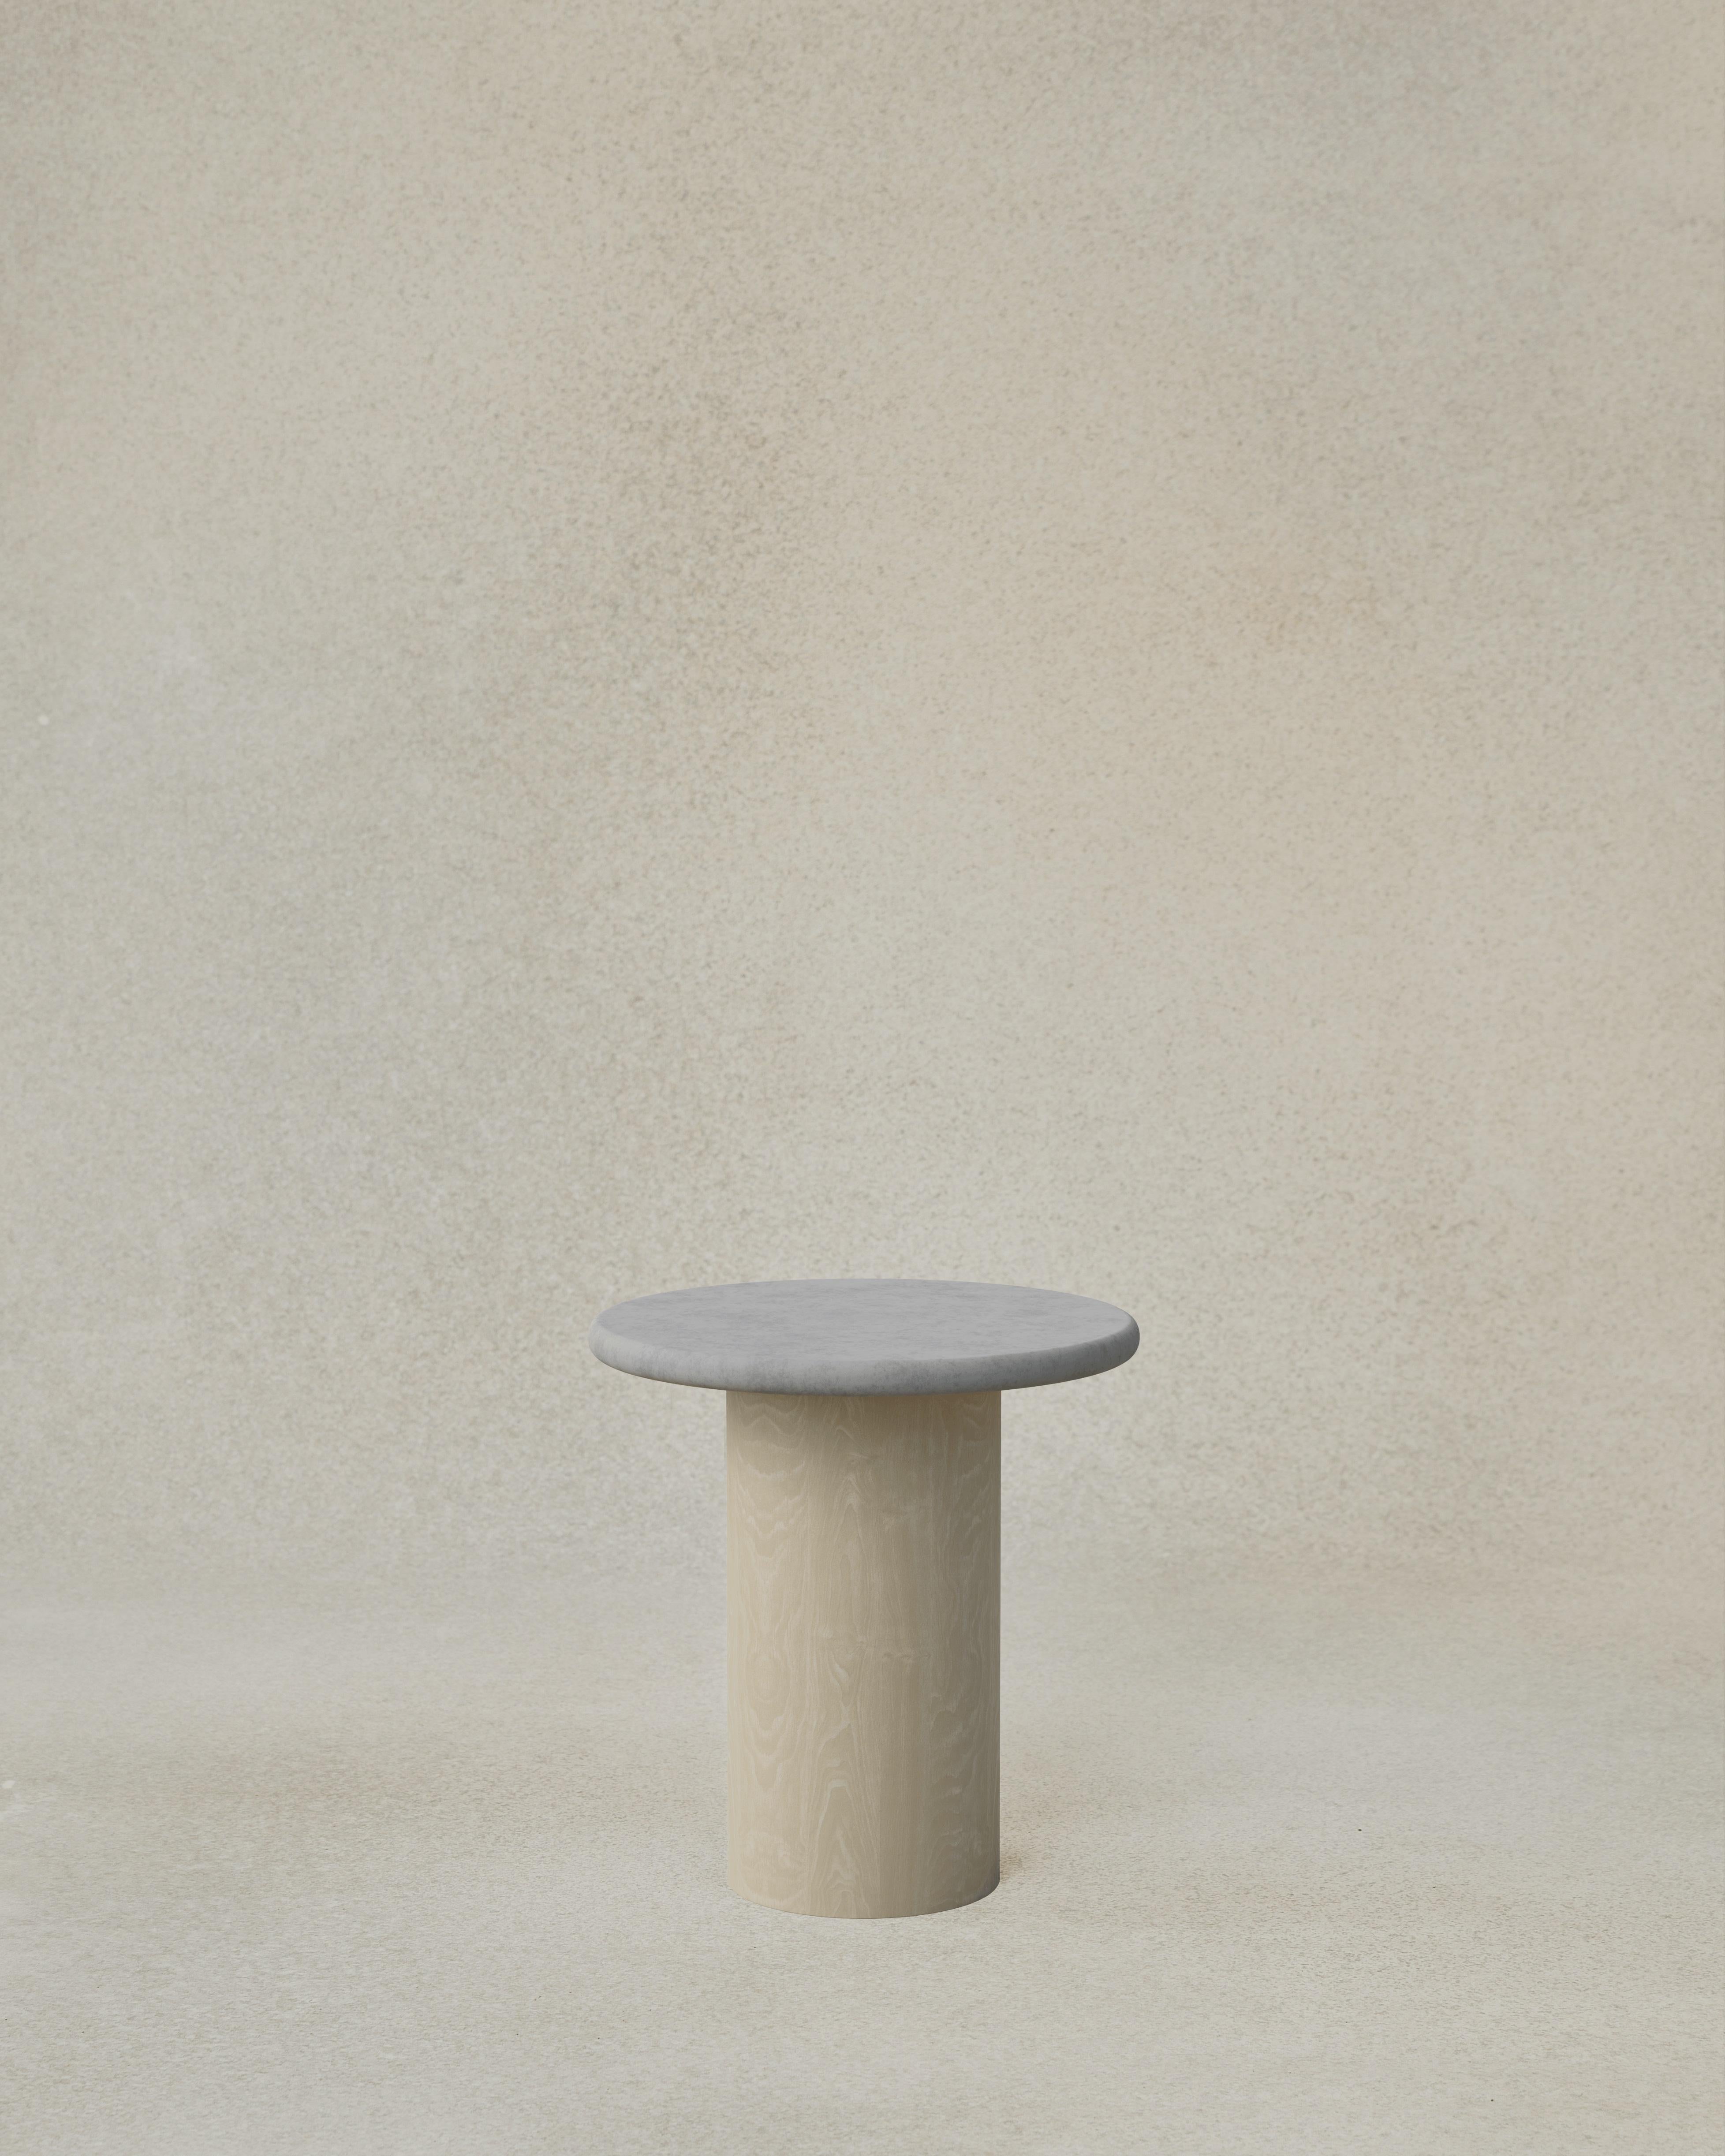 The Raindrop 400 is the second to smallest side table, perfect to pair with a 800 or 1000 Raindrop, and now available in a range of finishes to suit any interior or style. The raindrops nestle together to form a cascading series of tables in height